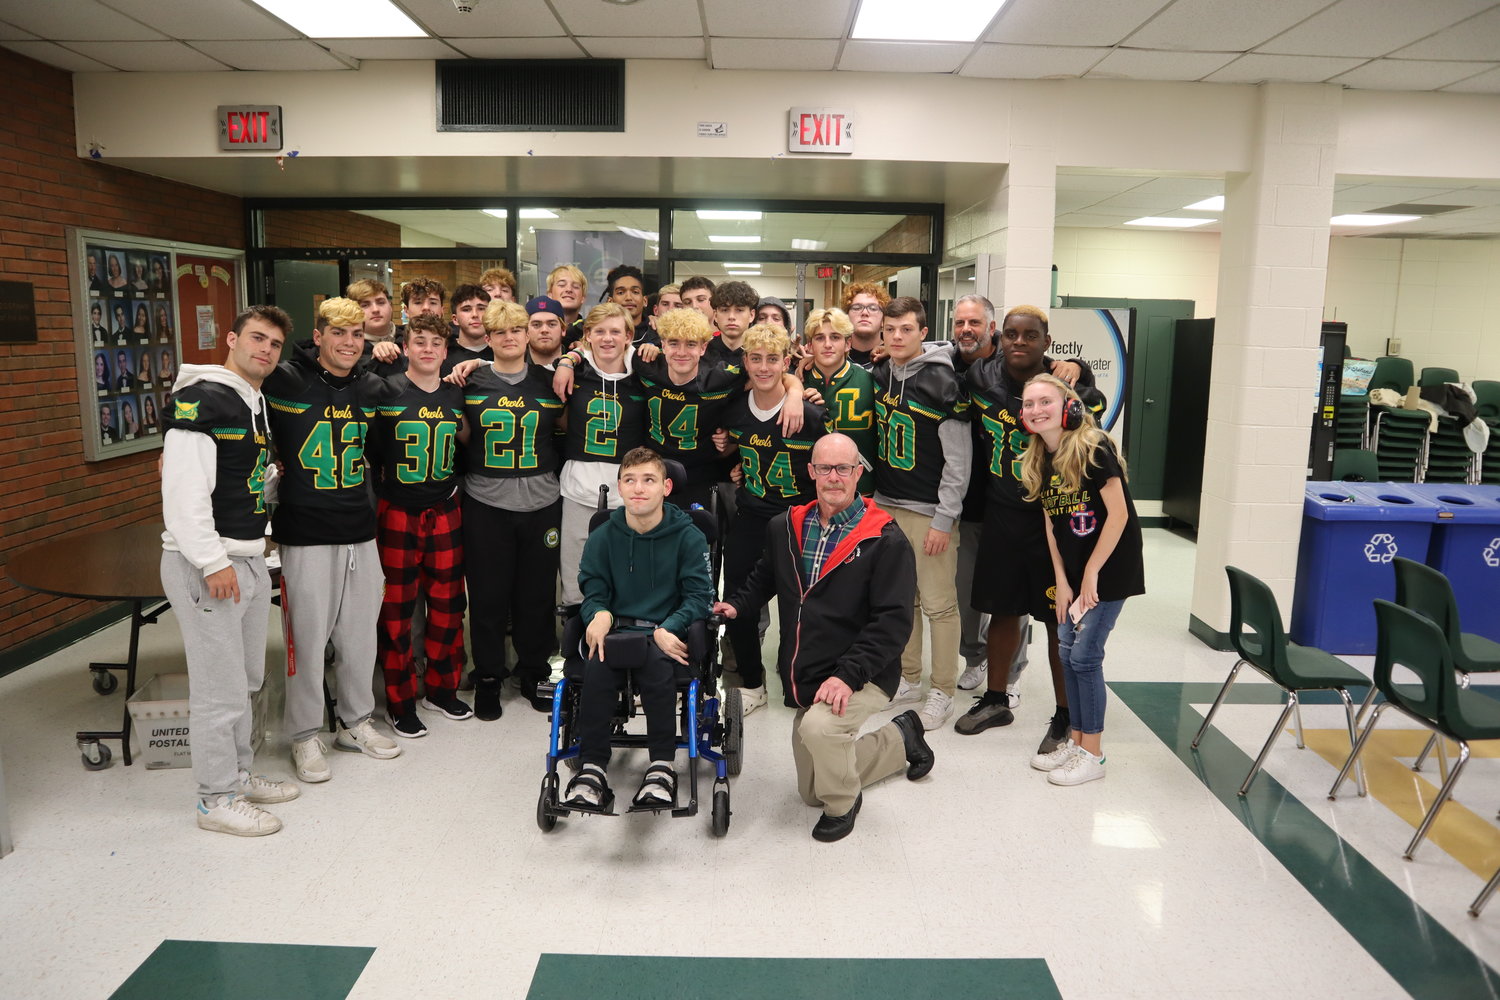 The Lynbrook High School varsity football team recently raised $3,200 for Camp Anchor and gathered at the Nov. 9 board of education meeting.